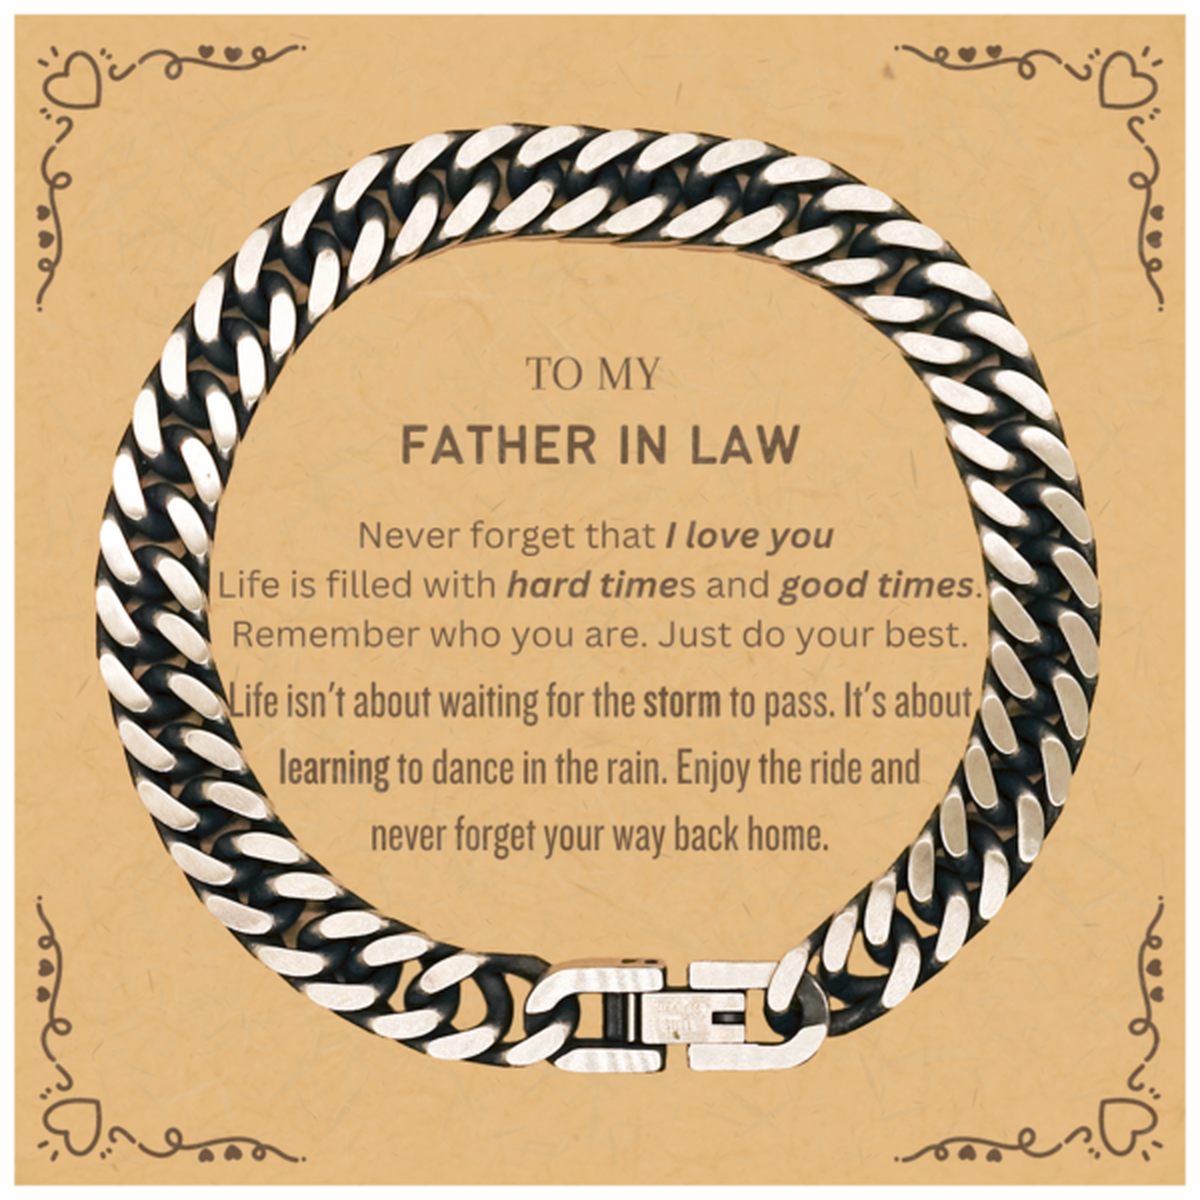 Christmas Father In Law Cuban Link Chain Bracelet Gifts, To My Father In Law Birthday Thank You Gifts For Father In Law, Graduation Unique Gifts For Father In Law To My Father In Law Never forget that I love you life is filled with hard times and good tim